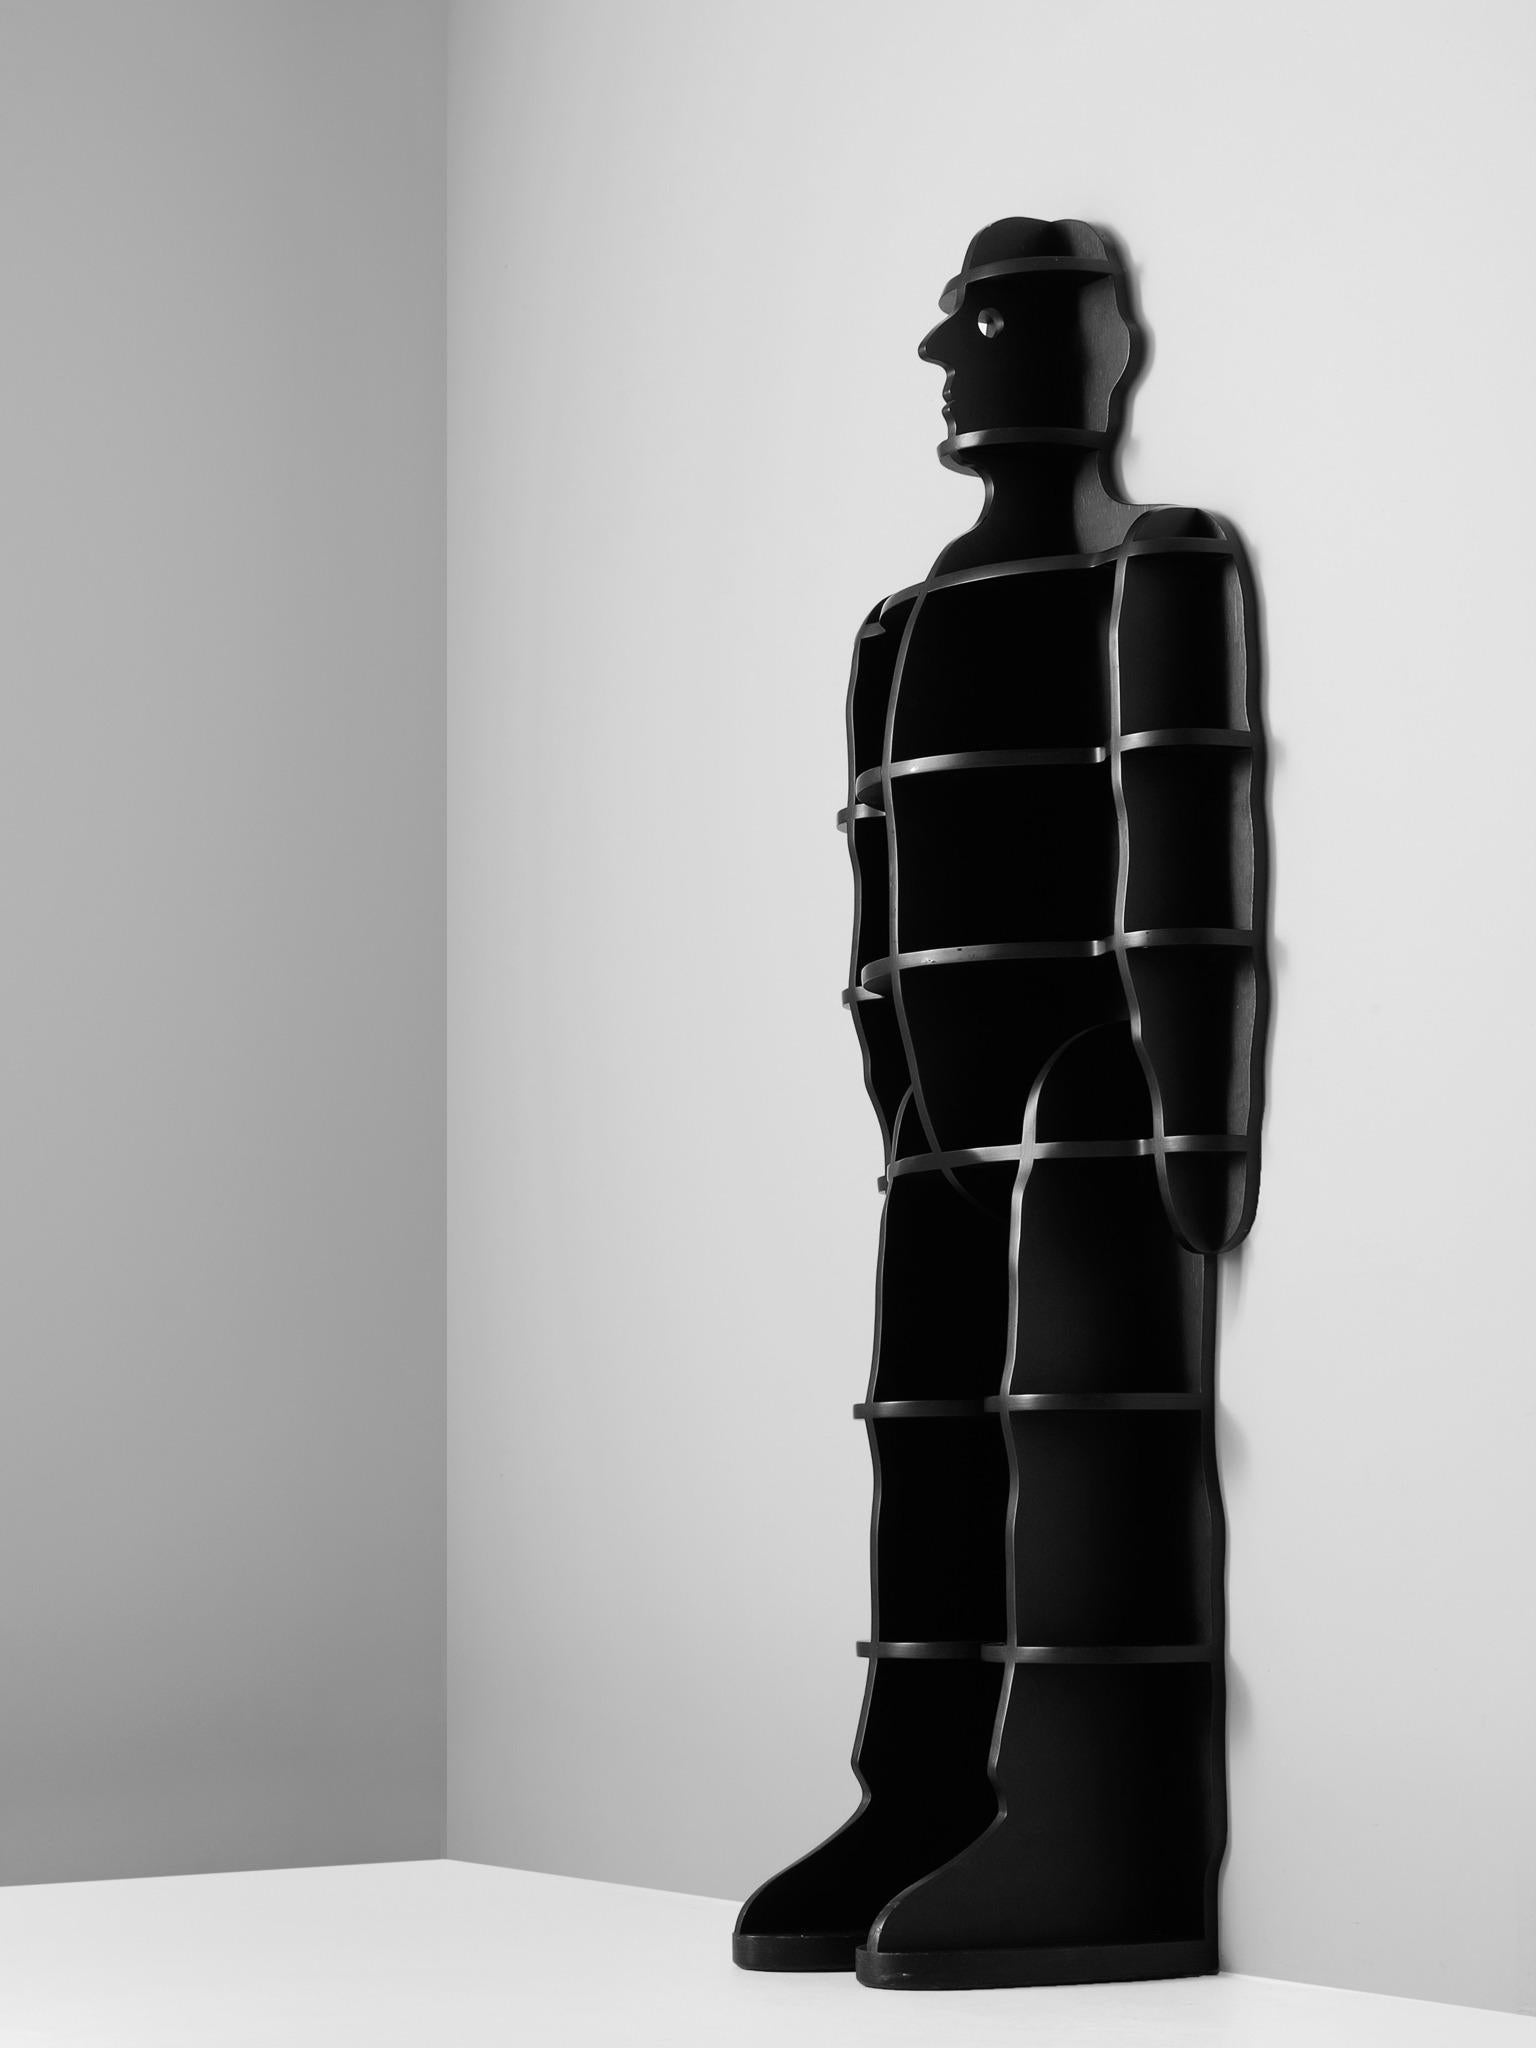 Susi & Ueli Berger for Ro¨thlisberger Kollektion, bookcase, plywood, Switzerland, 1977. 

'Fachermann' in black stained wood, designed by Susi and Ueli Berger in 1977. This giant can guard over your treasures. The upright lines define a human